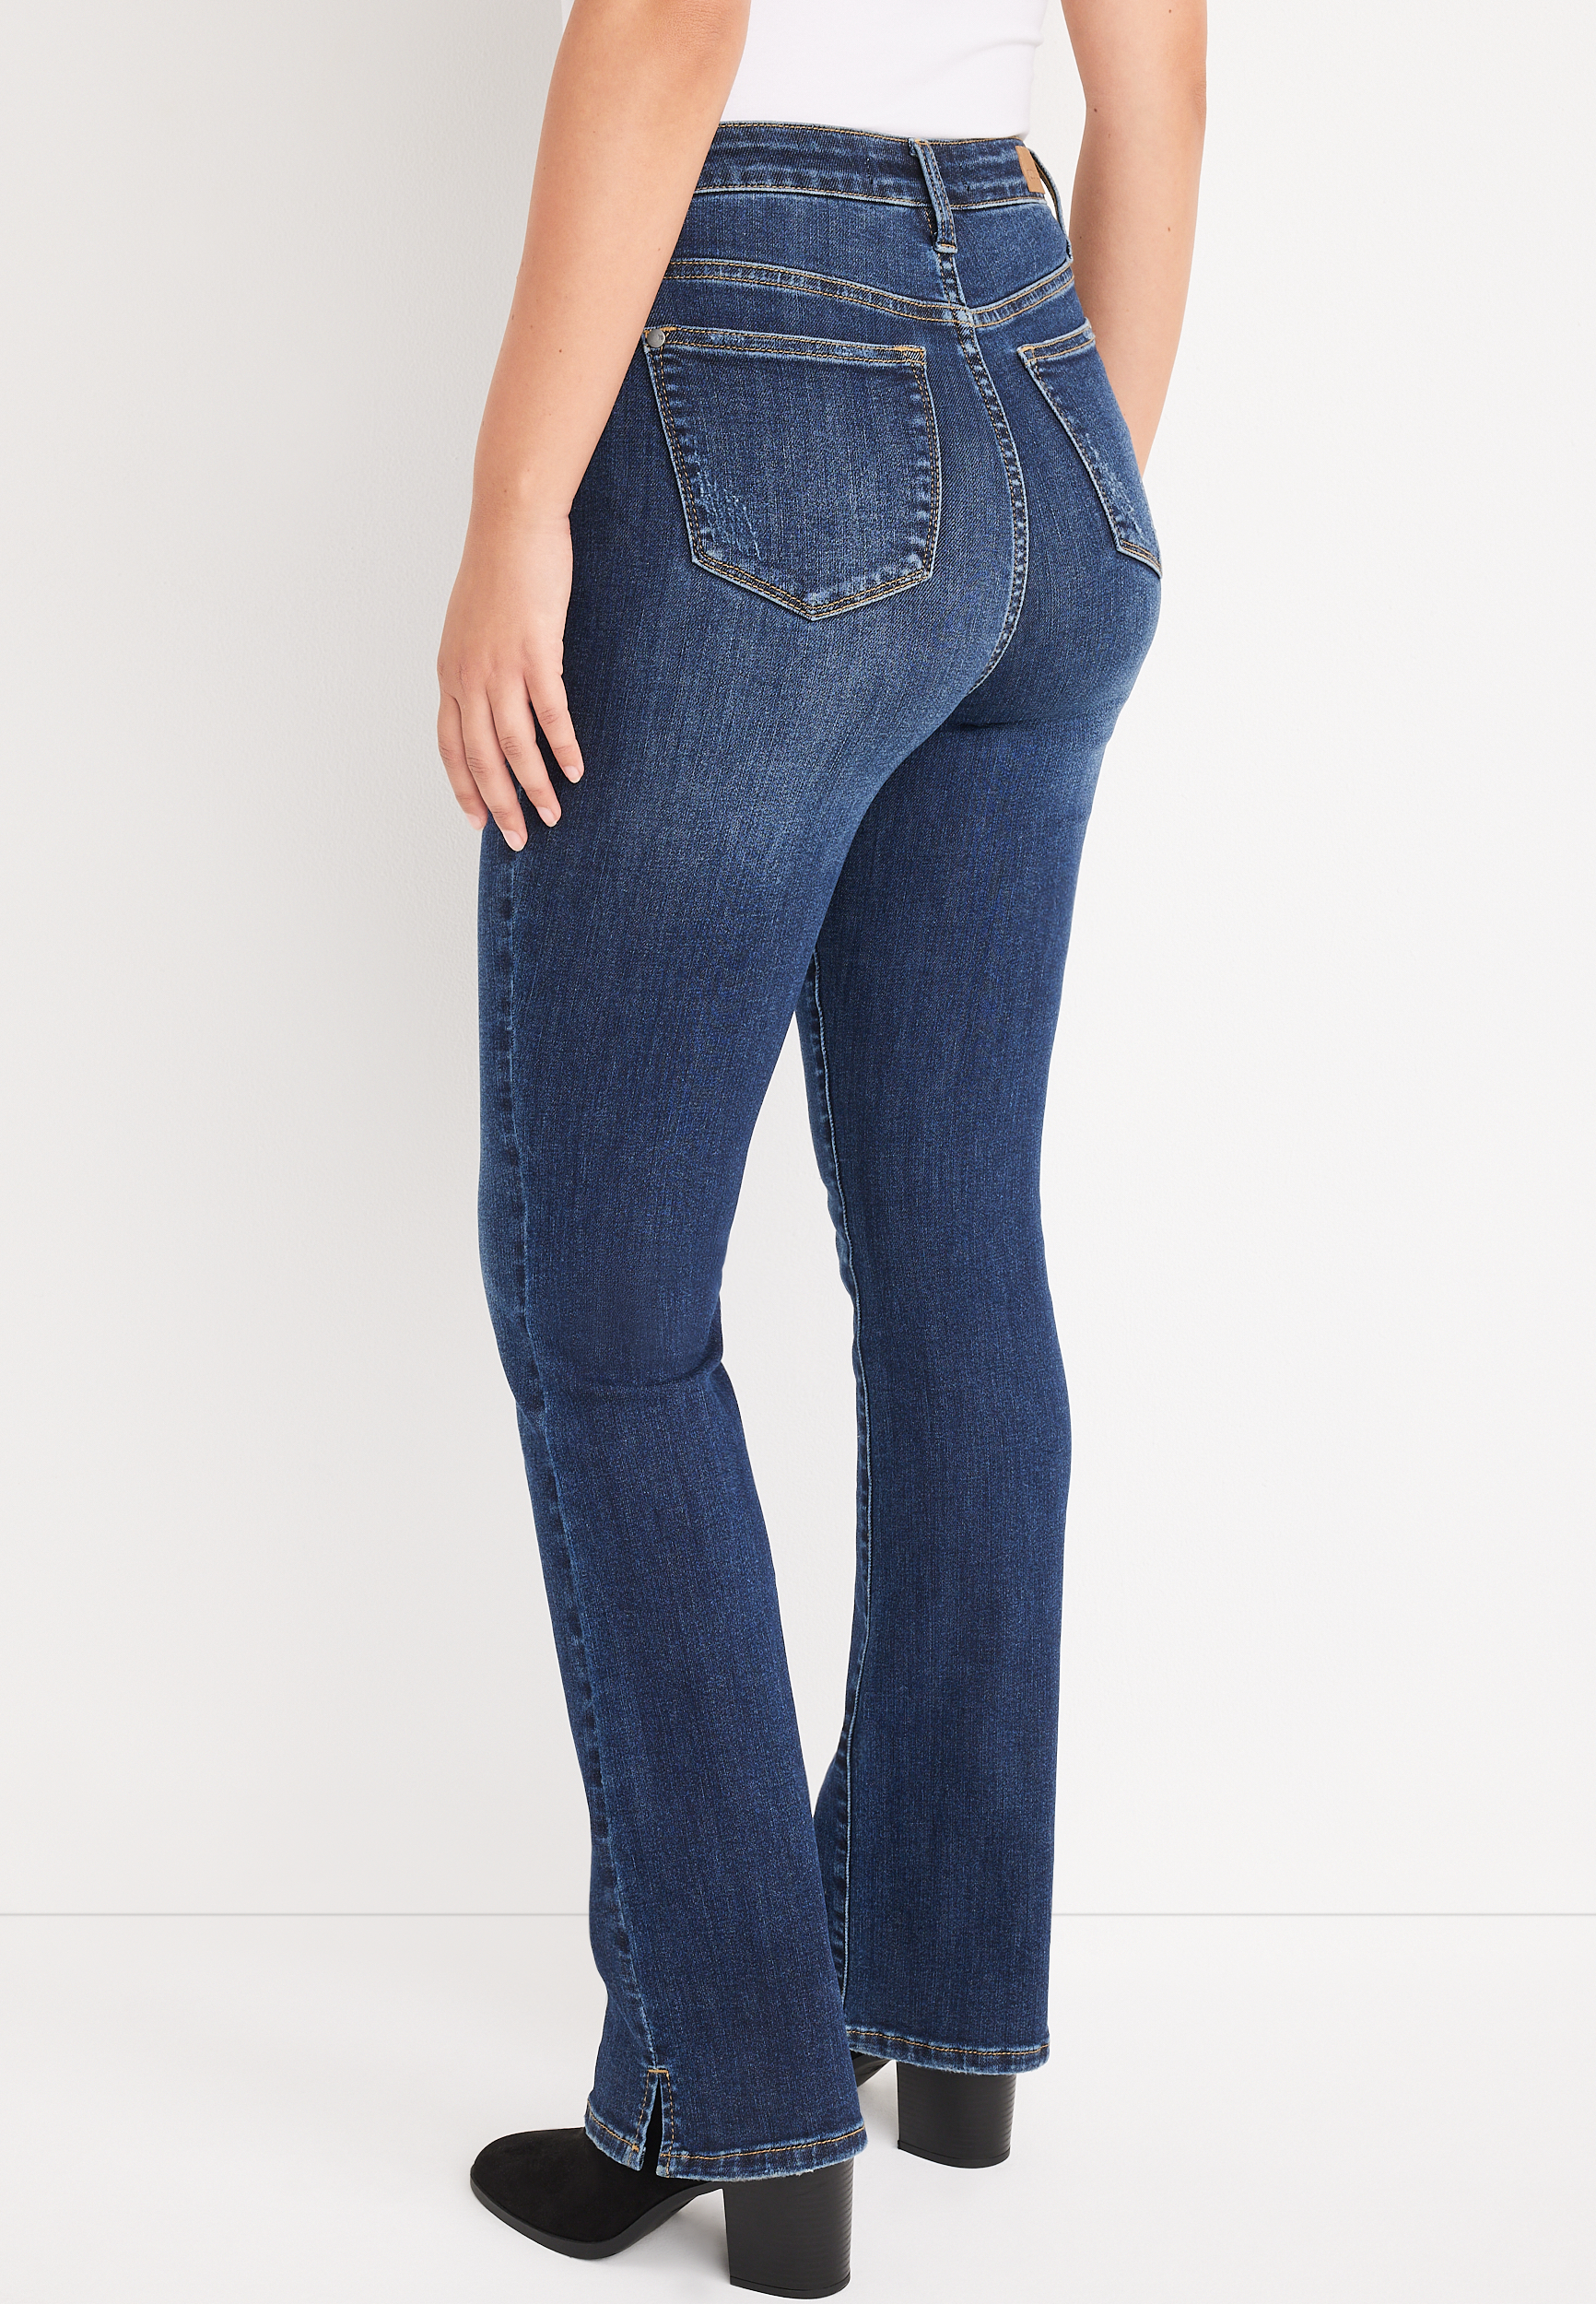 Judy Blue Boot Cut Jeans- High Waist; Contrast Wash (47R) – The Silver  Strawberry